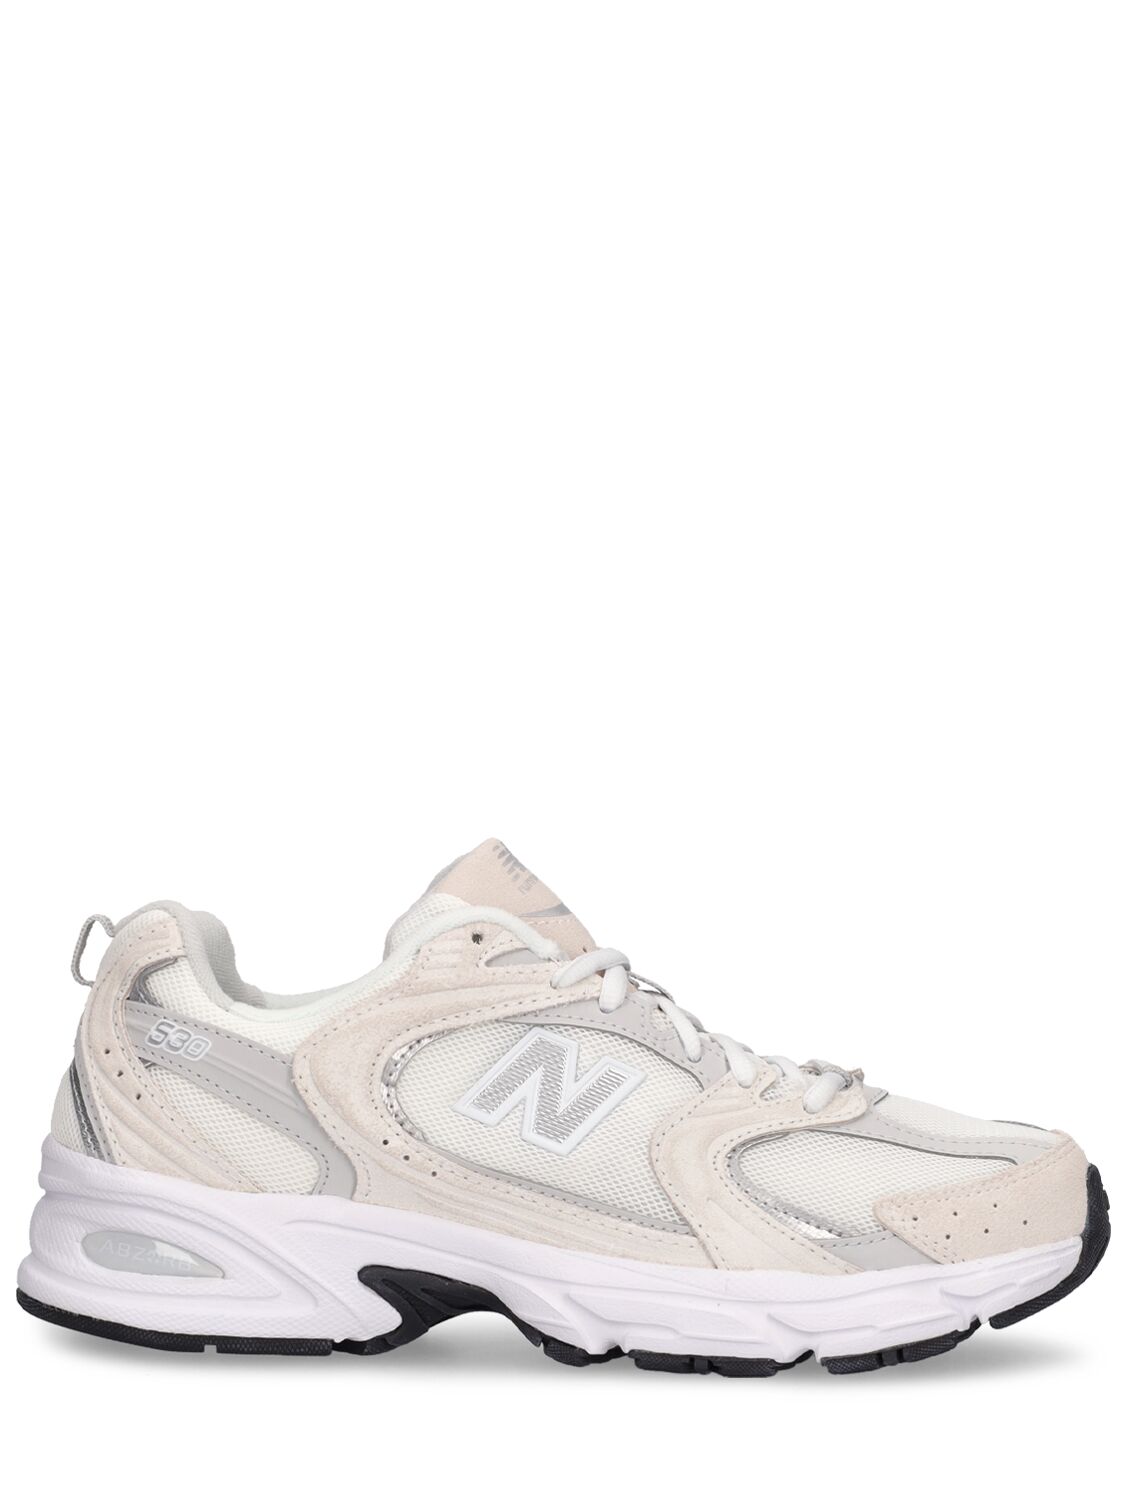 New Balance 530 sneakers in off white